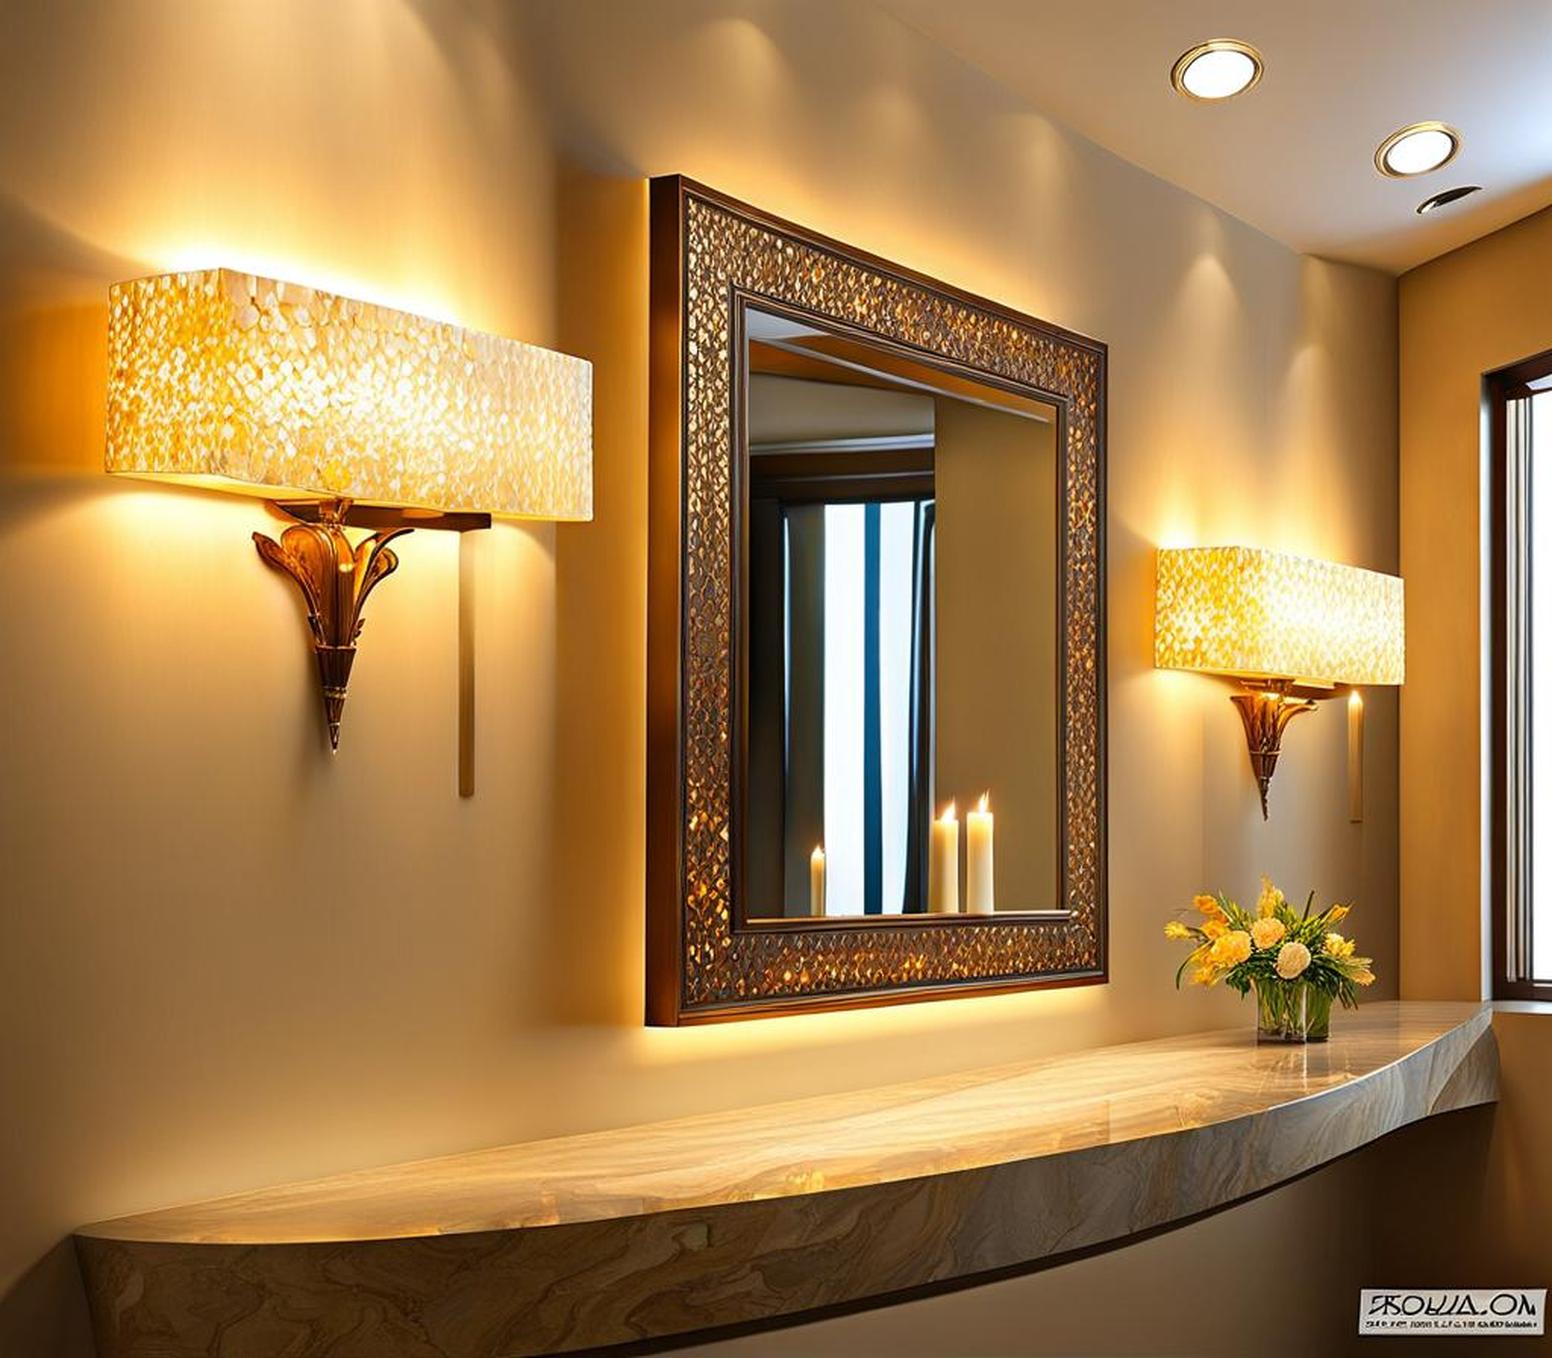 Decorating Confidently with Extra Long Wall Sconces